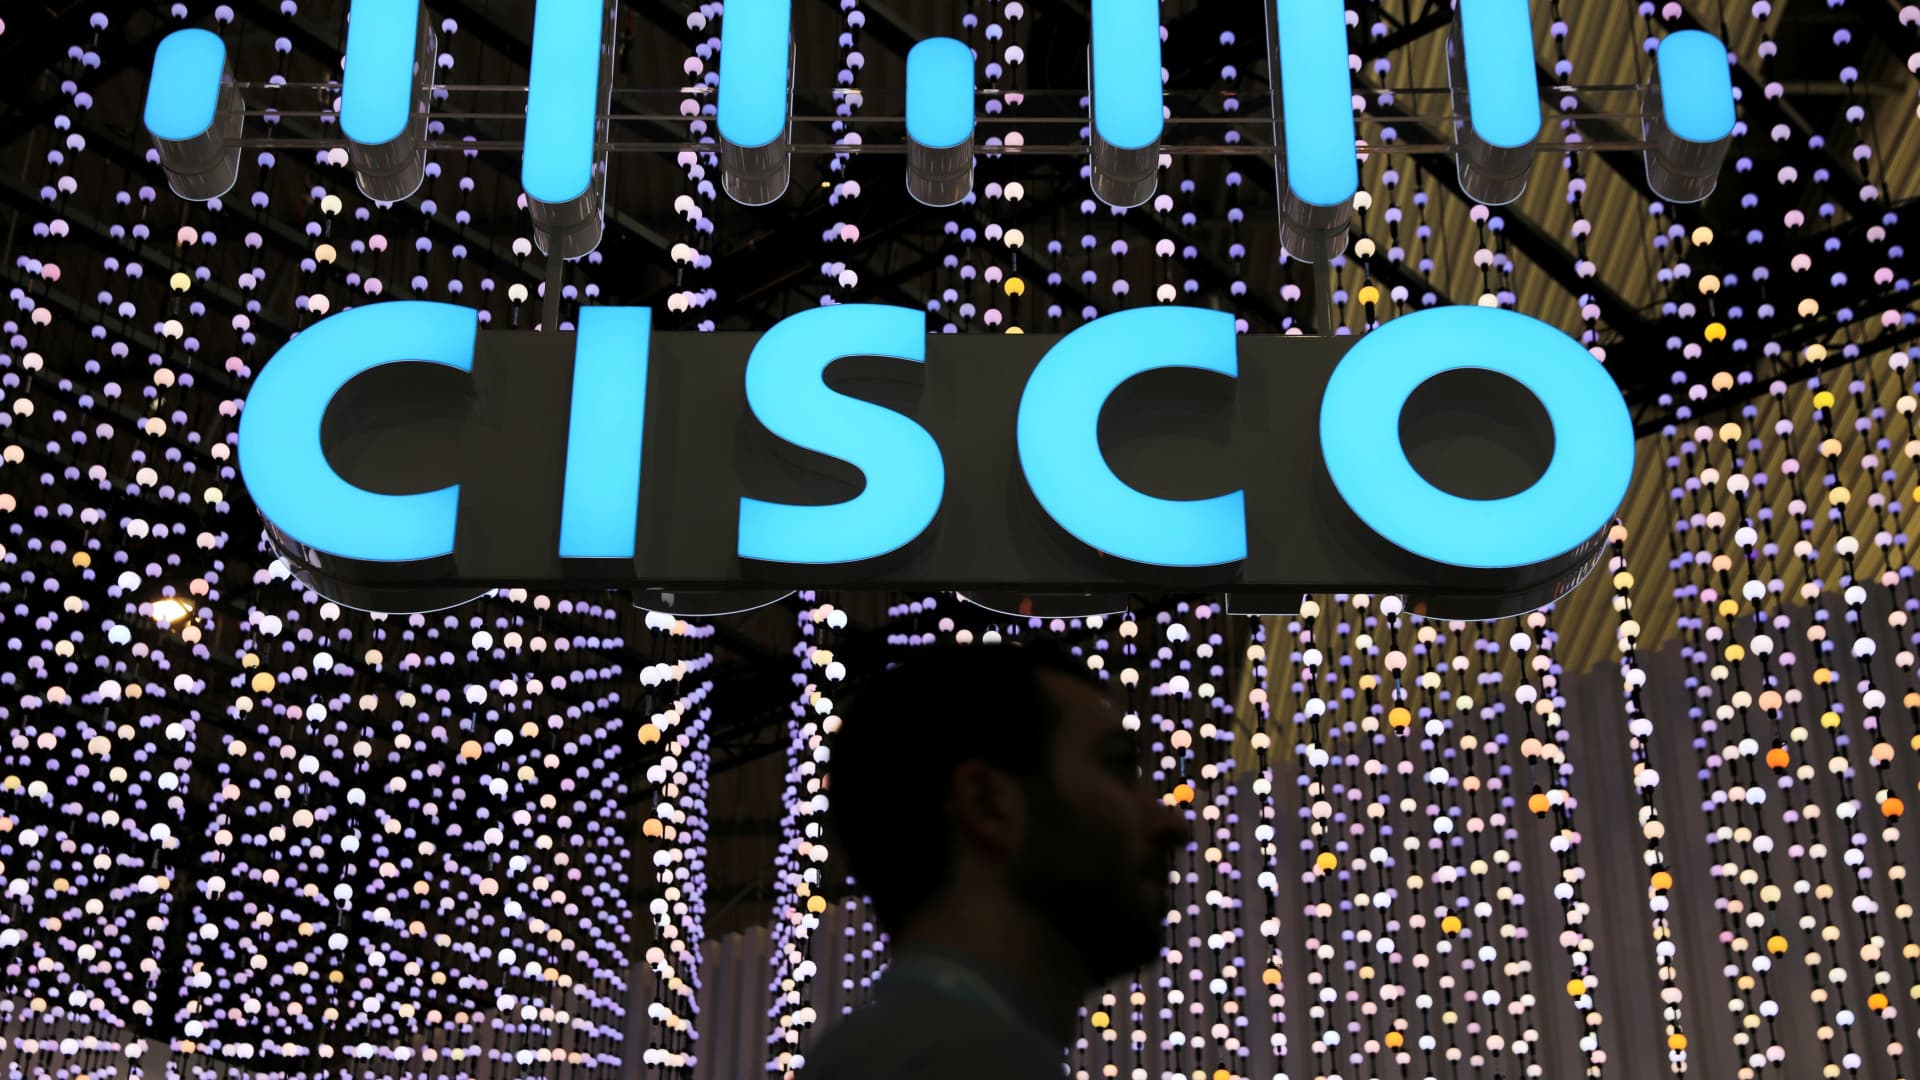 A man passes under a Cisco logo at the Mobile World Congress in Barcelona, Spain February 25, 2019.